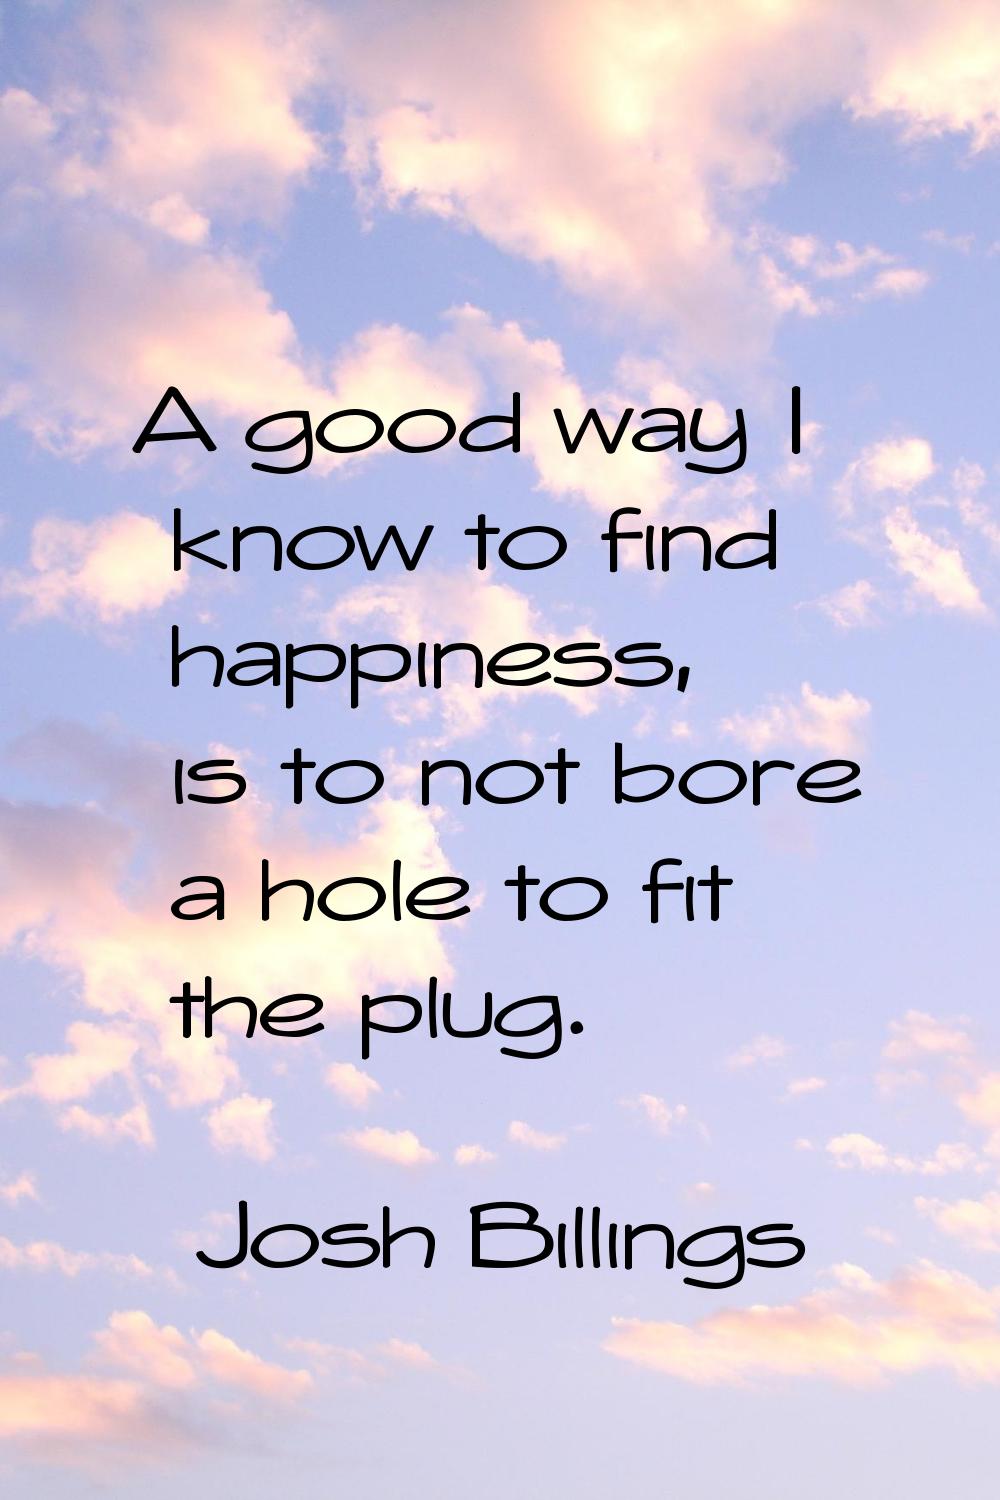 A good way I know to find happiness, is to not bore a hole to fit the plug.